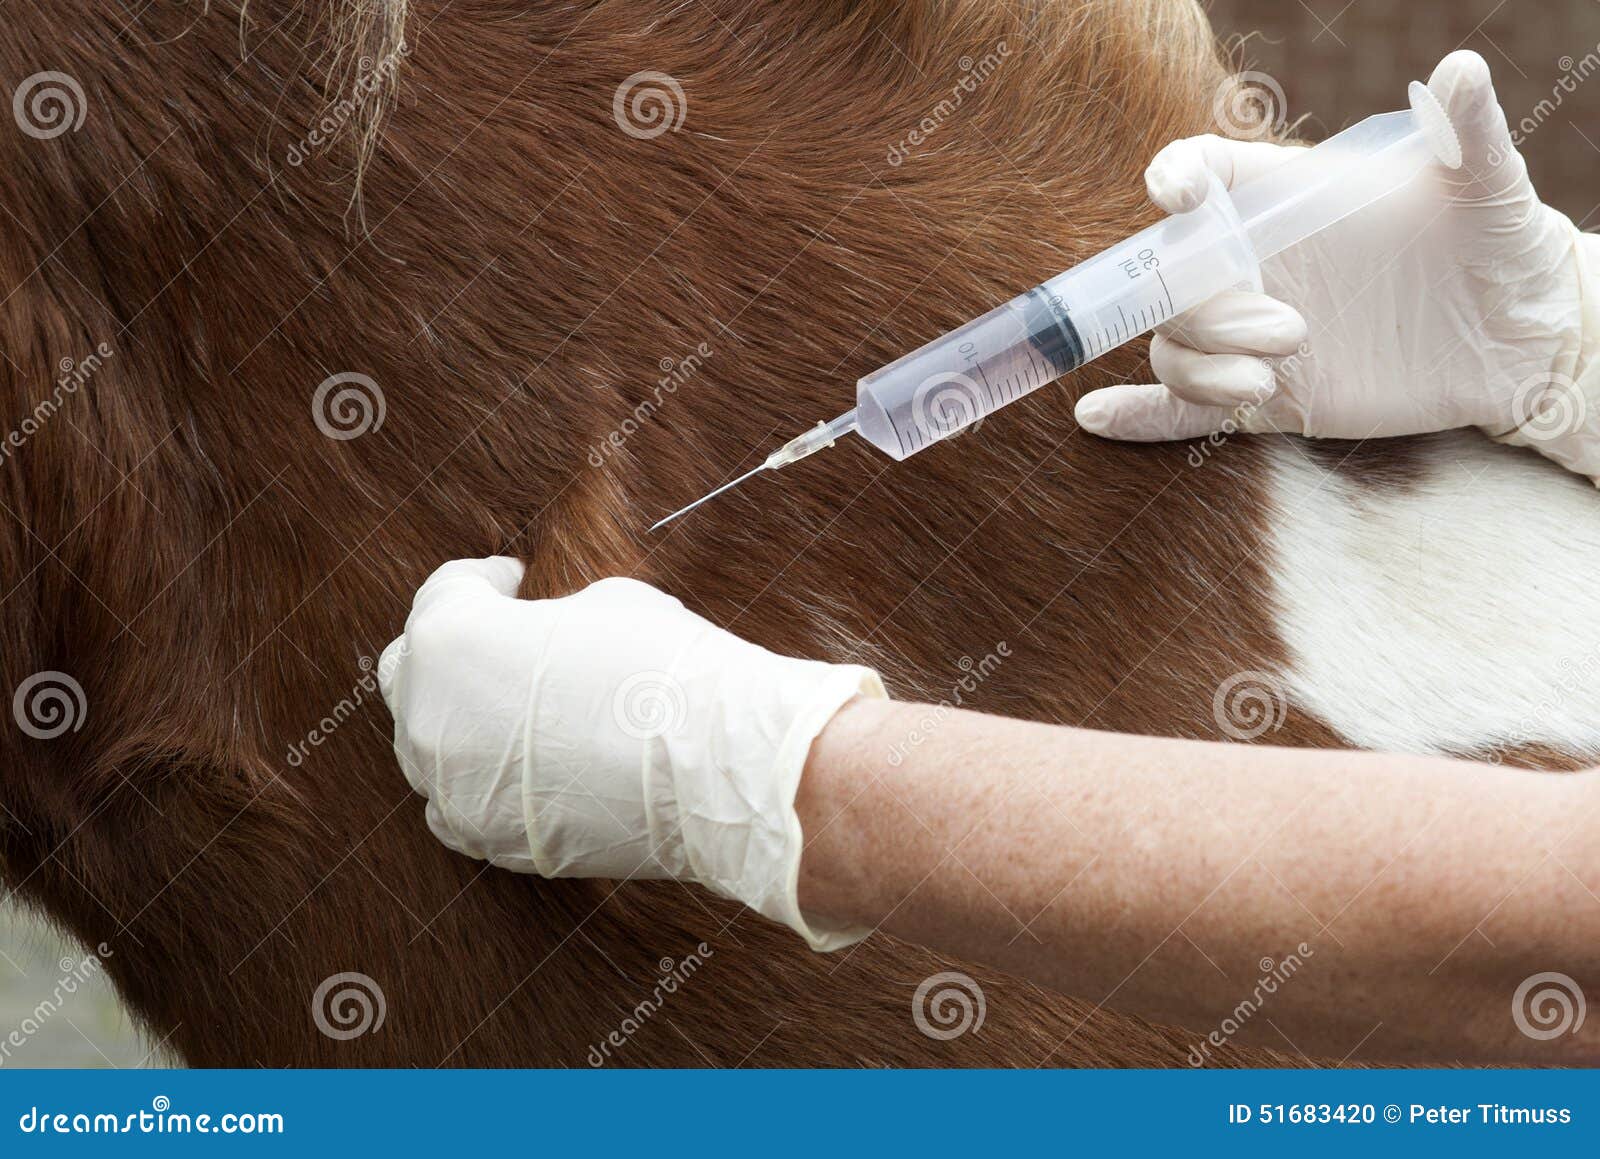 Medical Syringe Being Used To Inject an Animal Stock Photo - Image of  hands, practice: 51683420